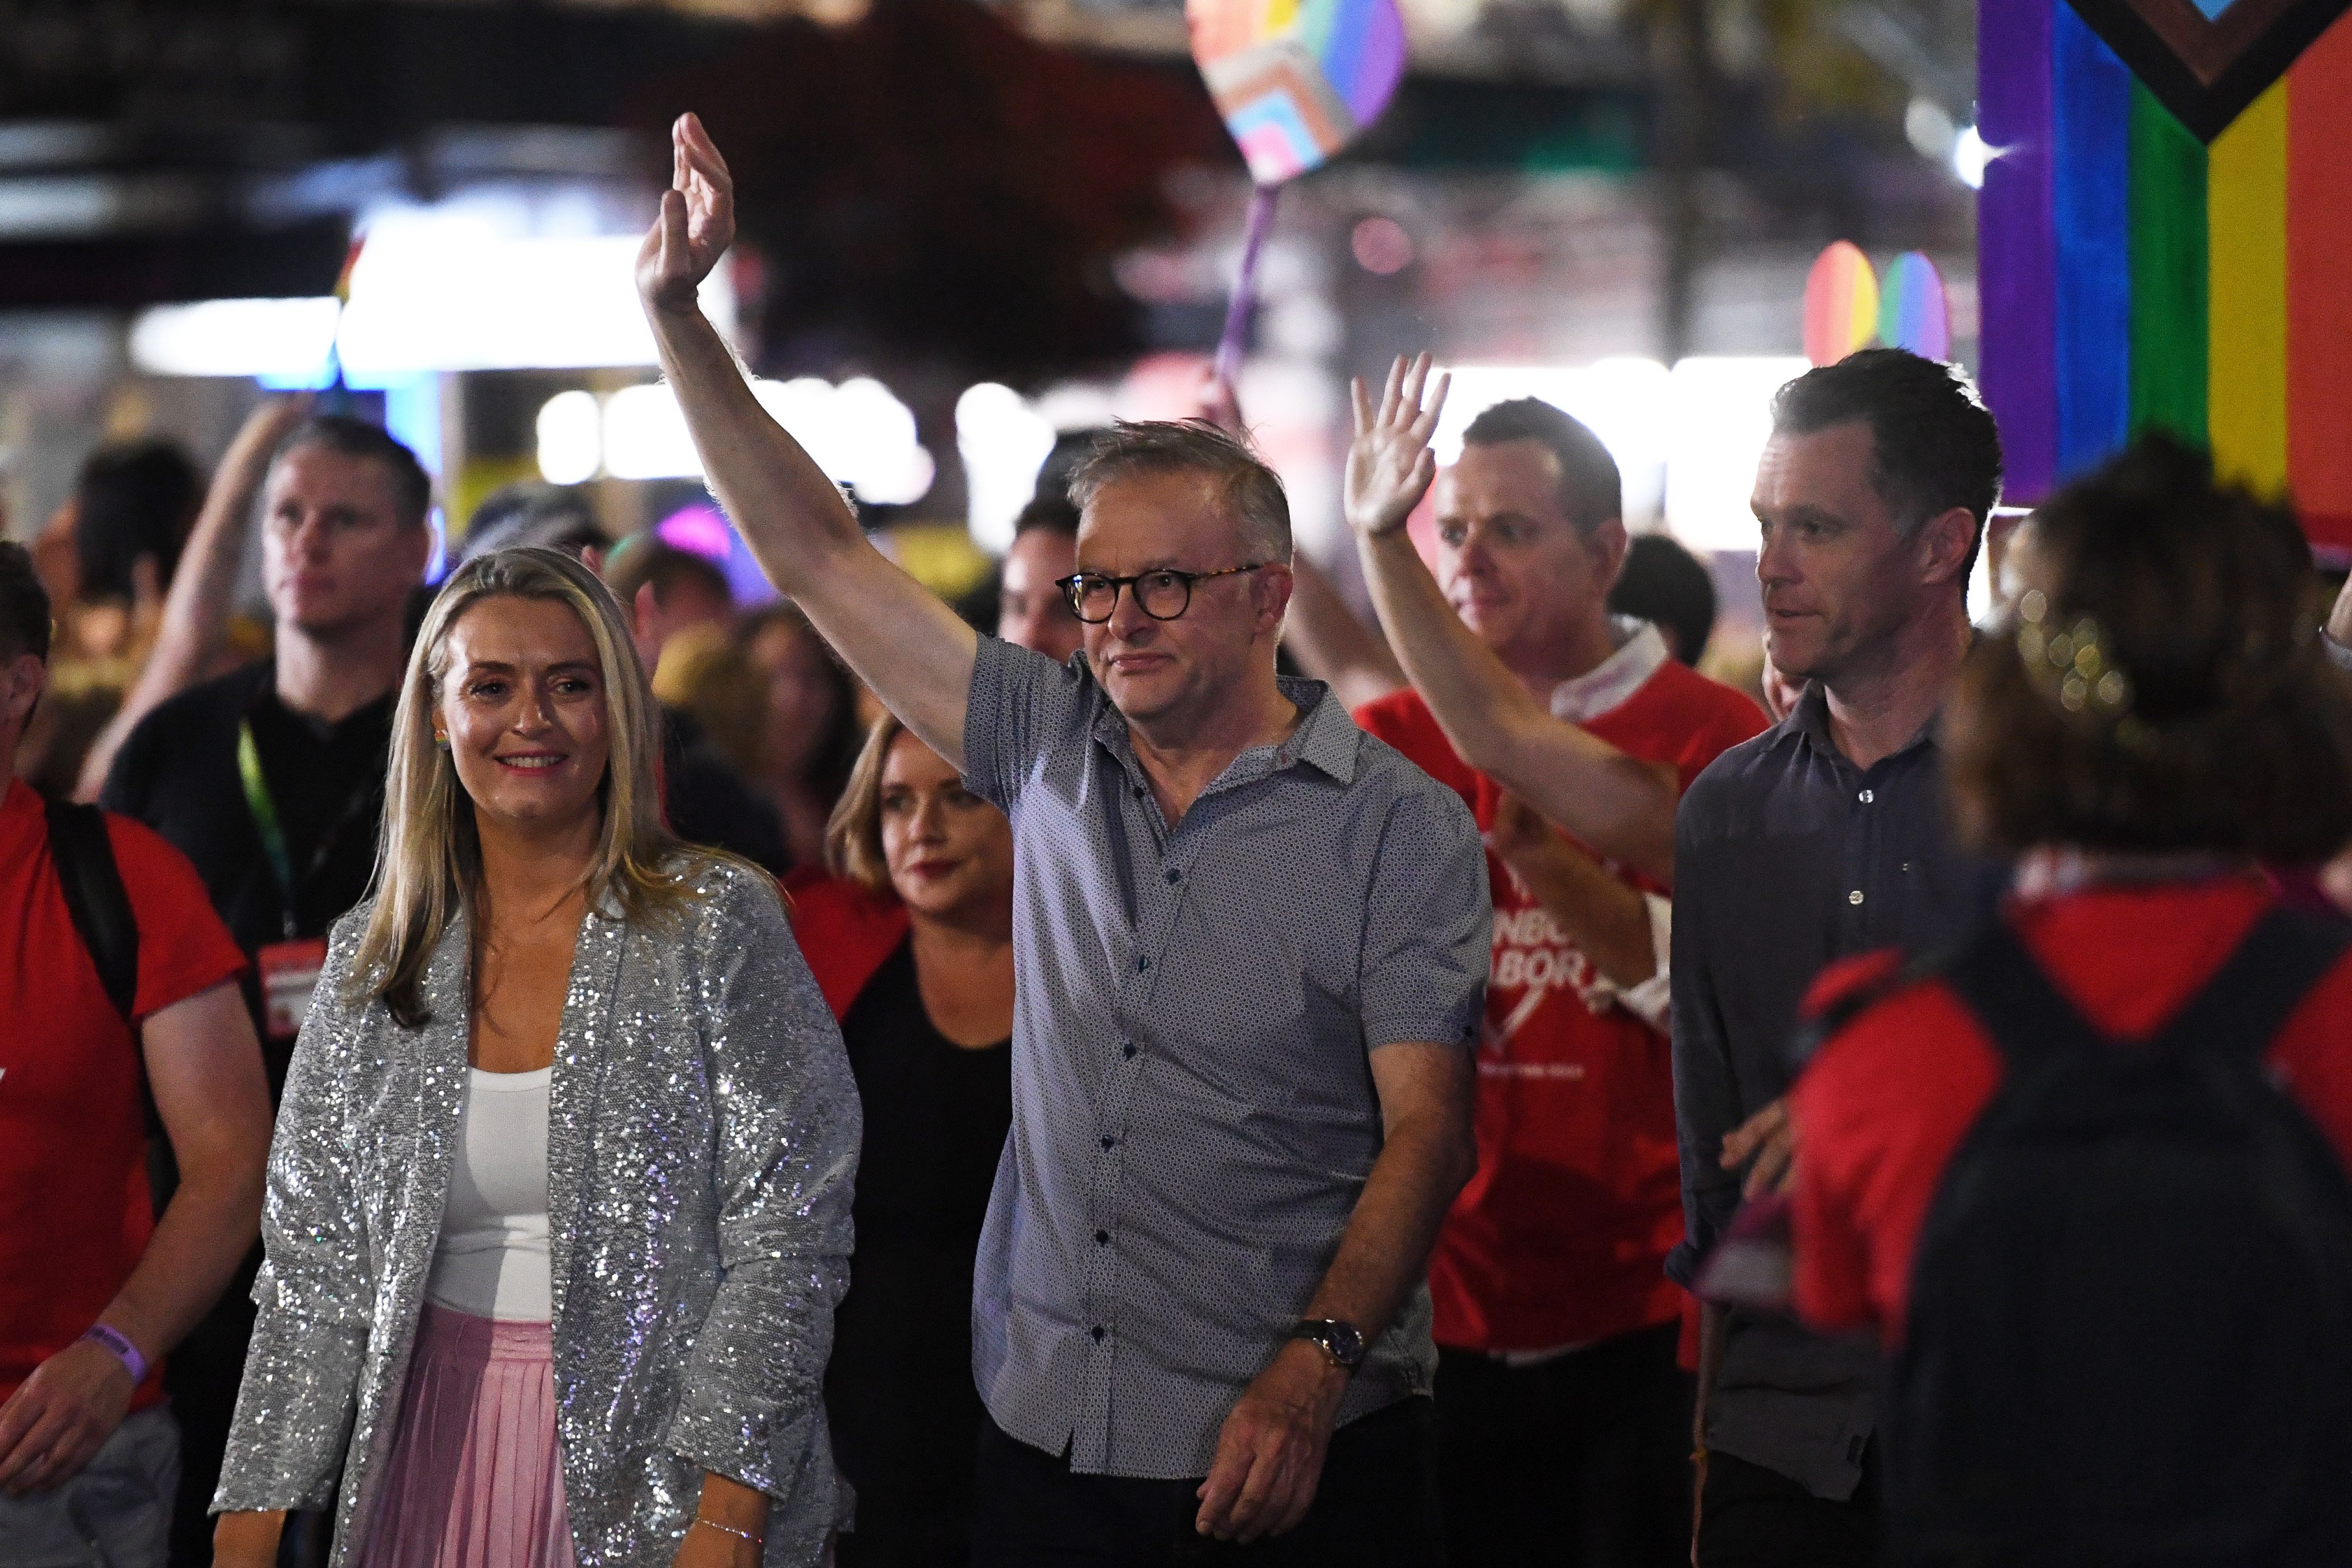  Australia’s Prime Minister Anthony Albanese, centre, joins the 45th annual Mardi Gras parade on Oxford Street in Sydney, Australia on Saturday. Photo: EPA-EFE